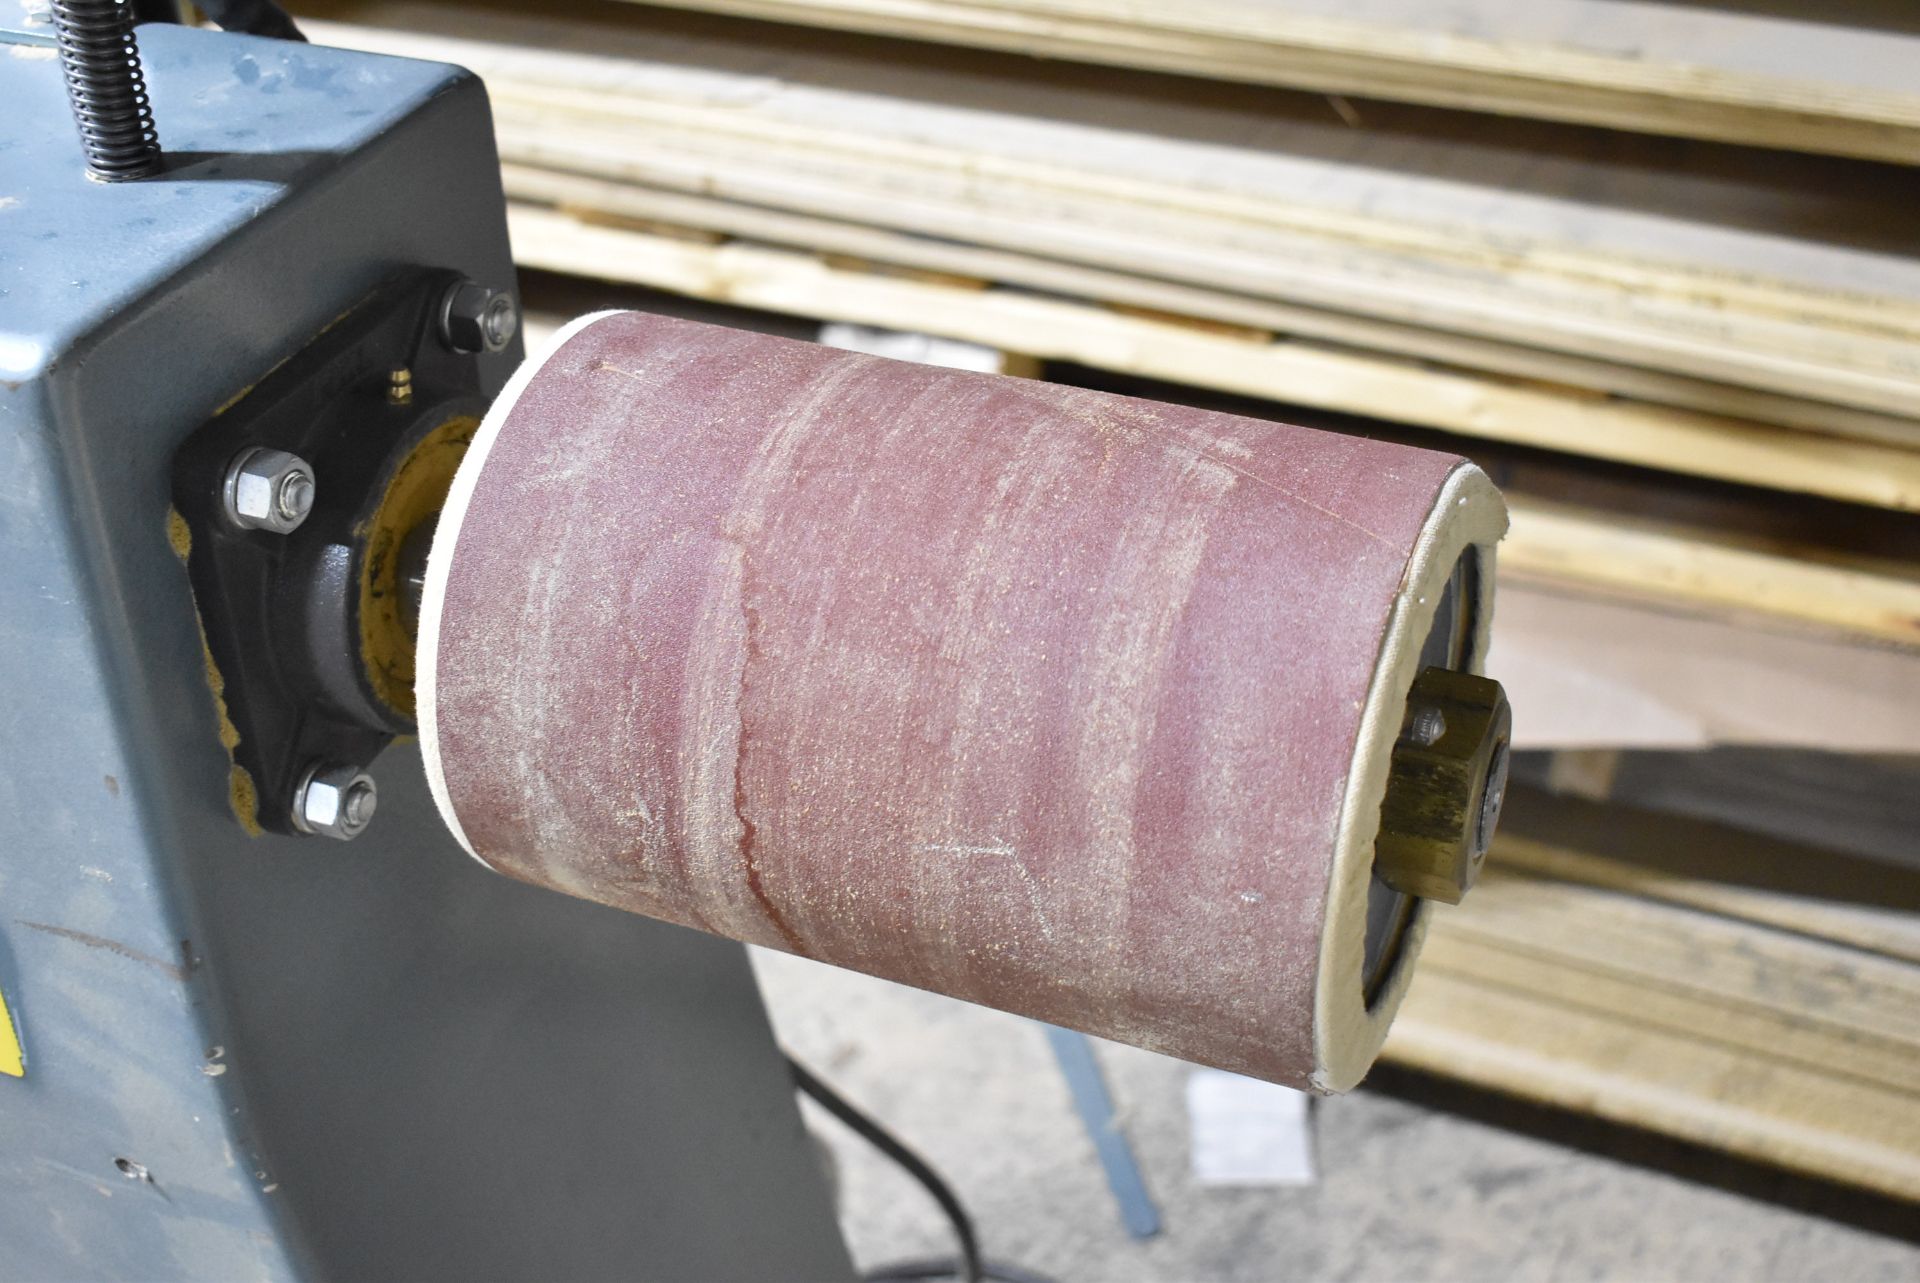 CHAMPAGNE ACR I00 T 2 HP COMBINATION SANDER/BUFFER WITH 9" SANDING SPINDLE, 5" X 14" BUFFER, 600V/ - Image 2 of 5